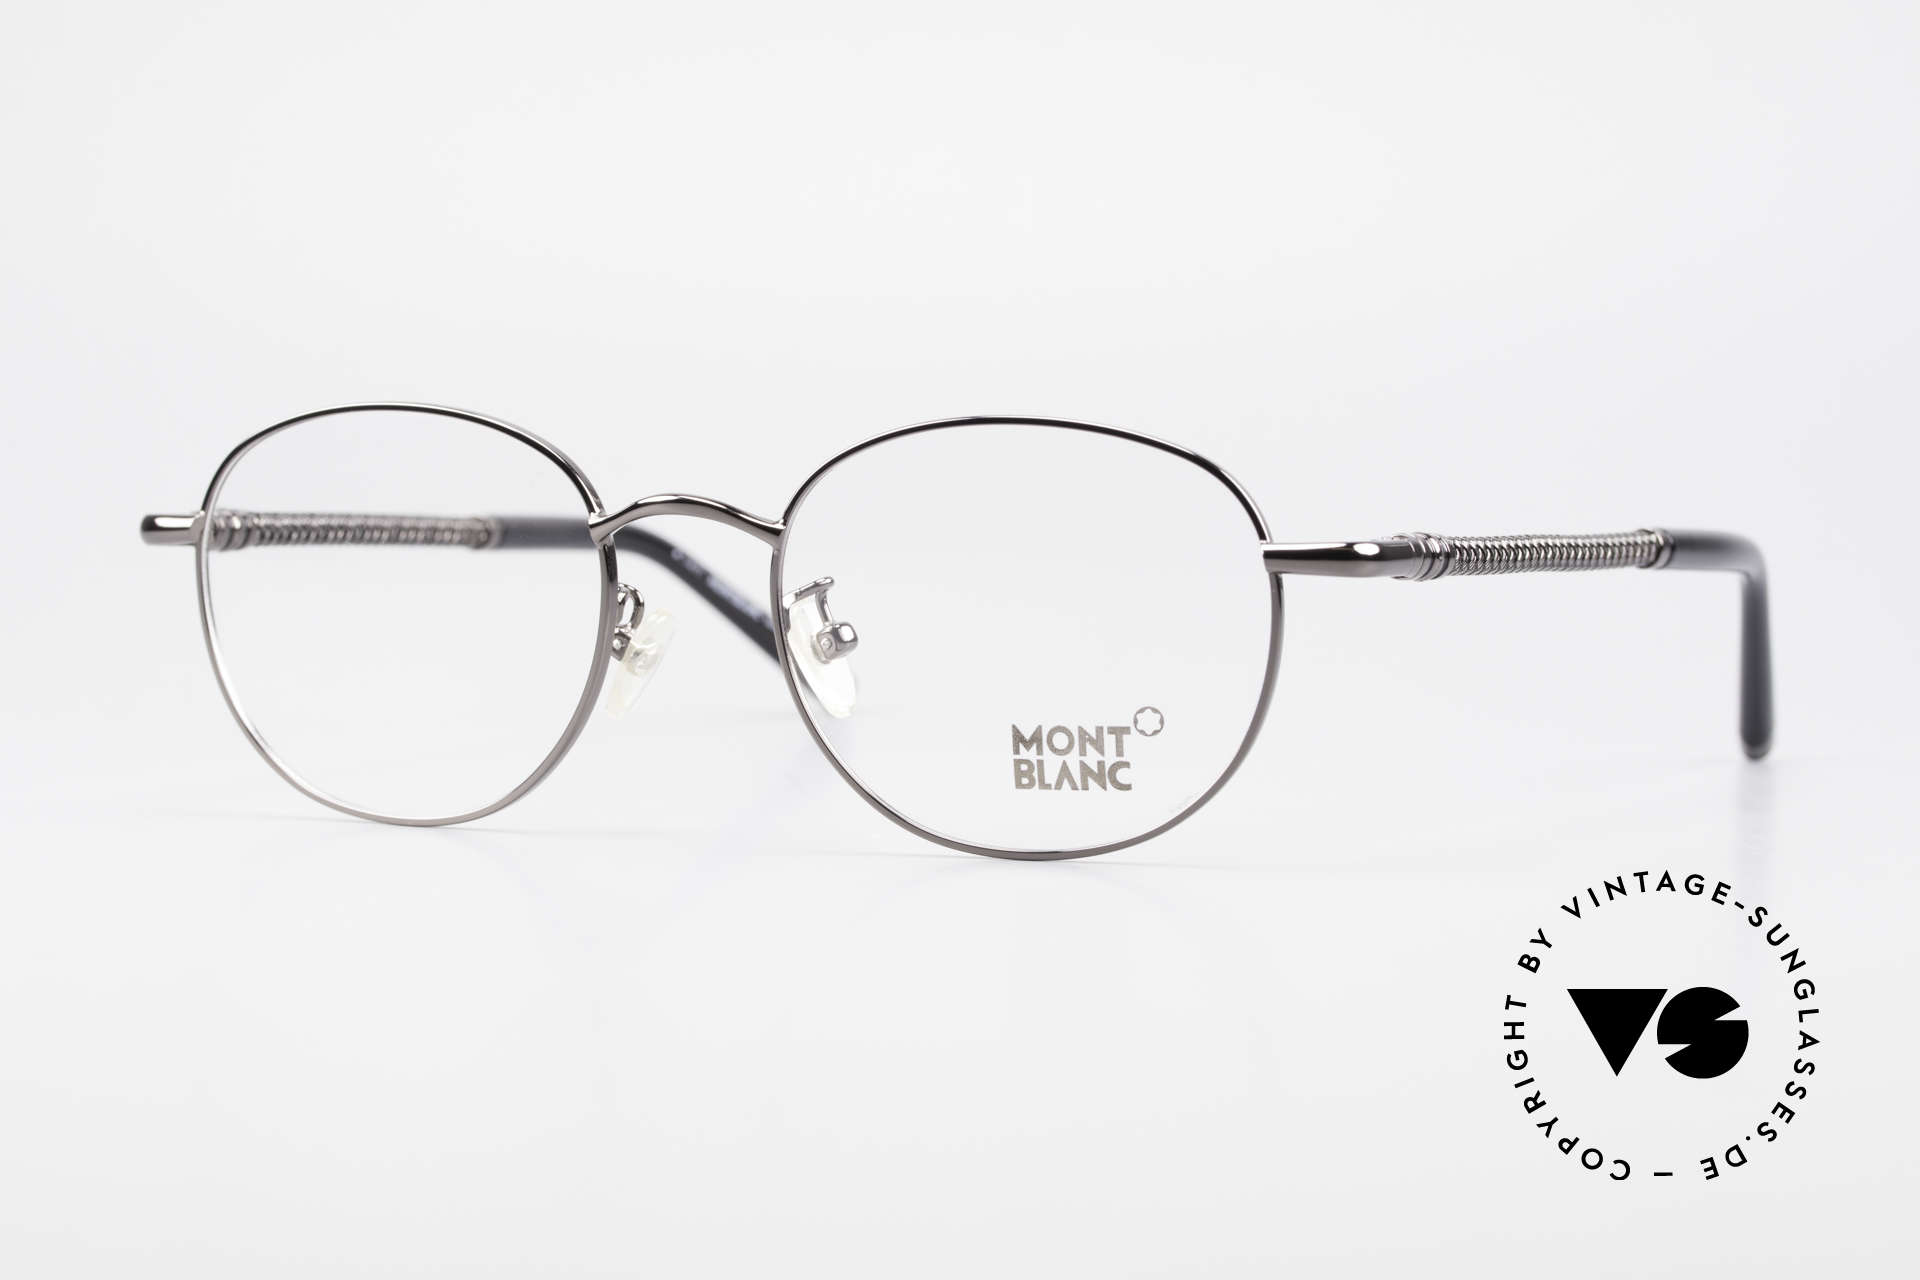 Montblanc MB392 Luxury Panto Frame Gunmetal, Mont Blanc Panto glasses, 392, col. 012, size 51/19, Made for Men and Women